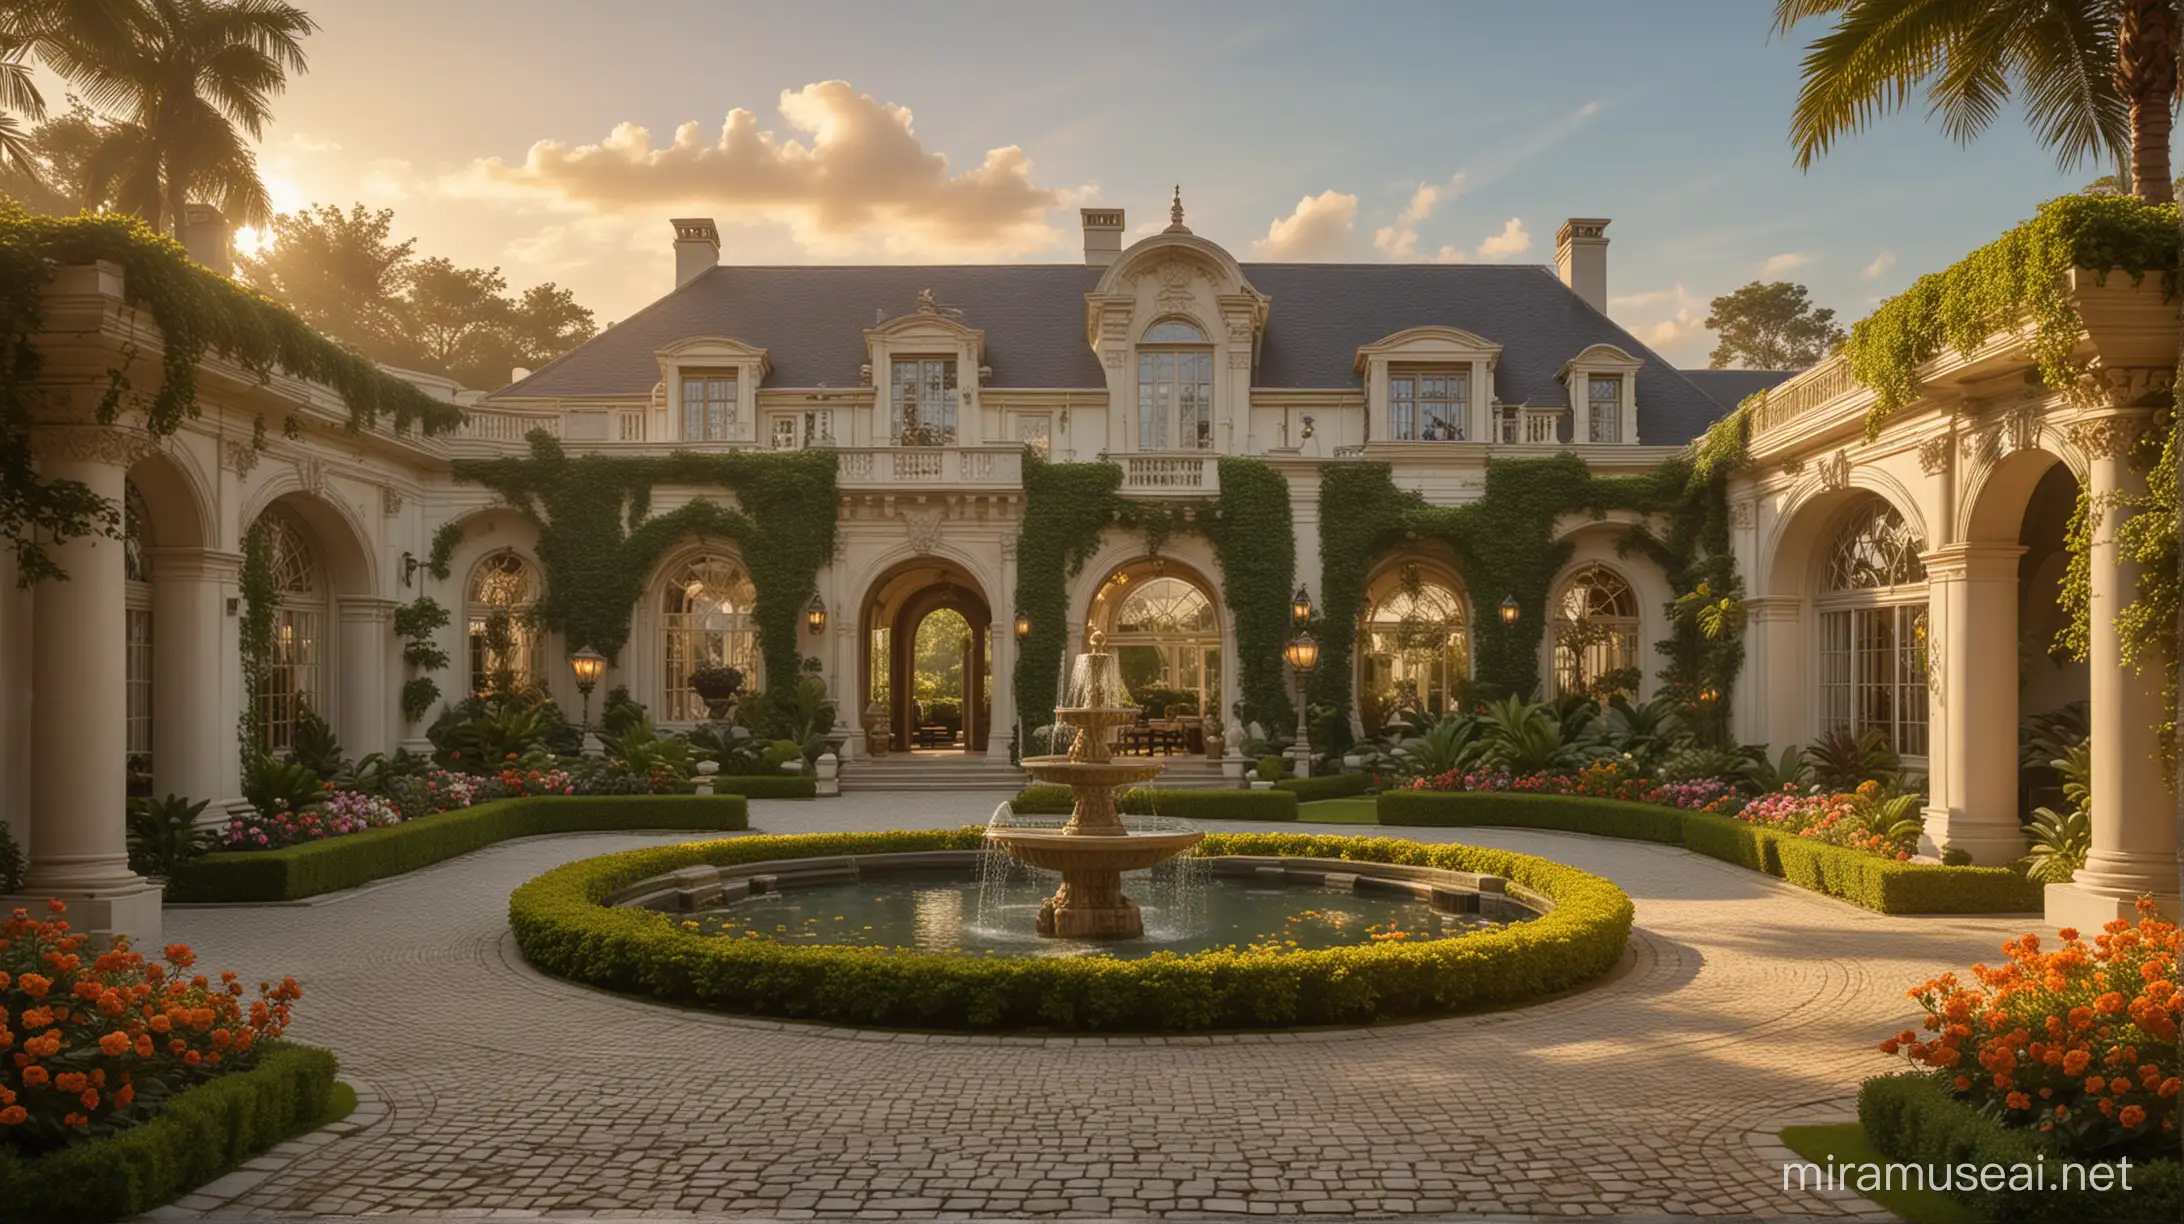 A lavish scene depicting prosperity and luxury. The setting is an opulent mansion with grand architecture, surrounded by lush gardens. In the foreground, there's a luxurious sports car parked on a cobblestone driveway. The mansion is adorned with golden accents and large windows, reflecting the setting sun. Expensive outdoor furniture and a fountain add to the sense of extravagance. The garden is meticulously landscaped, with exotic flowers and perfectly trimmed hedges, symbolizing wealth and opulence.